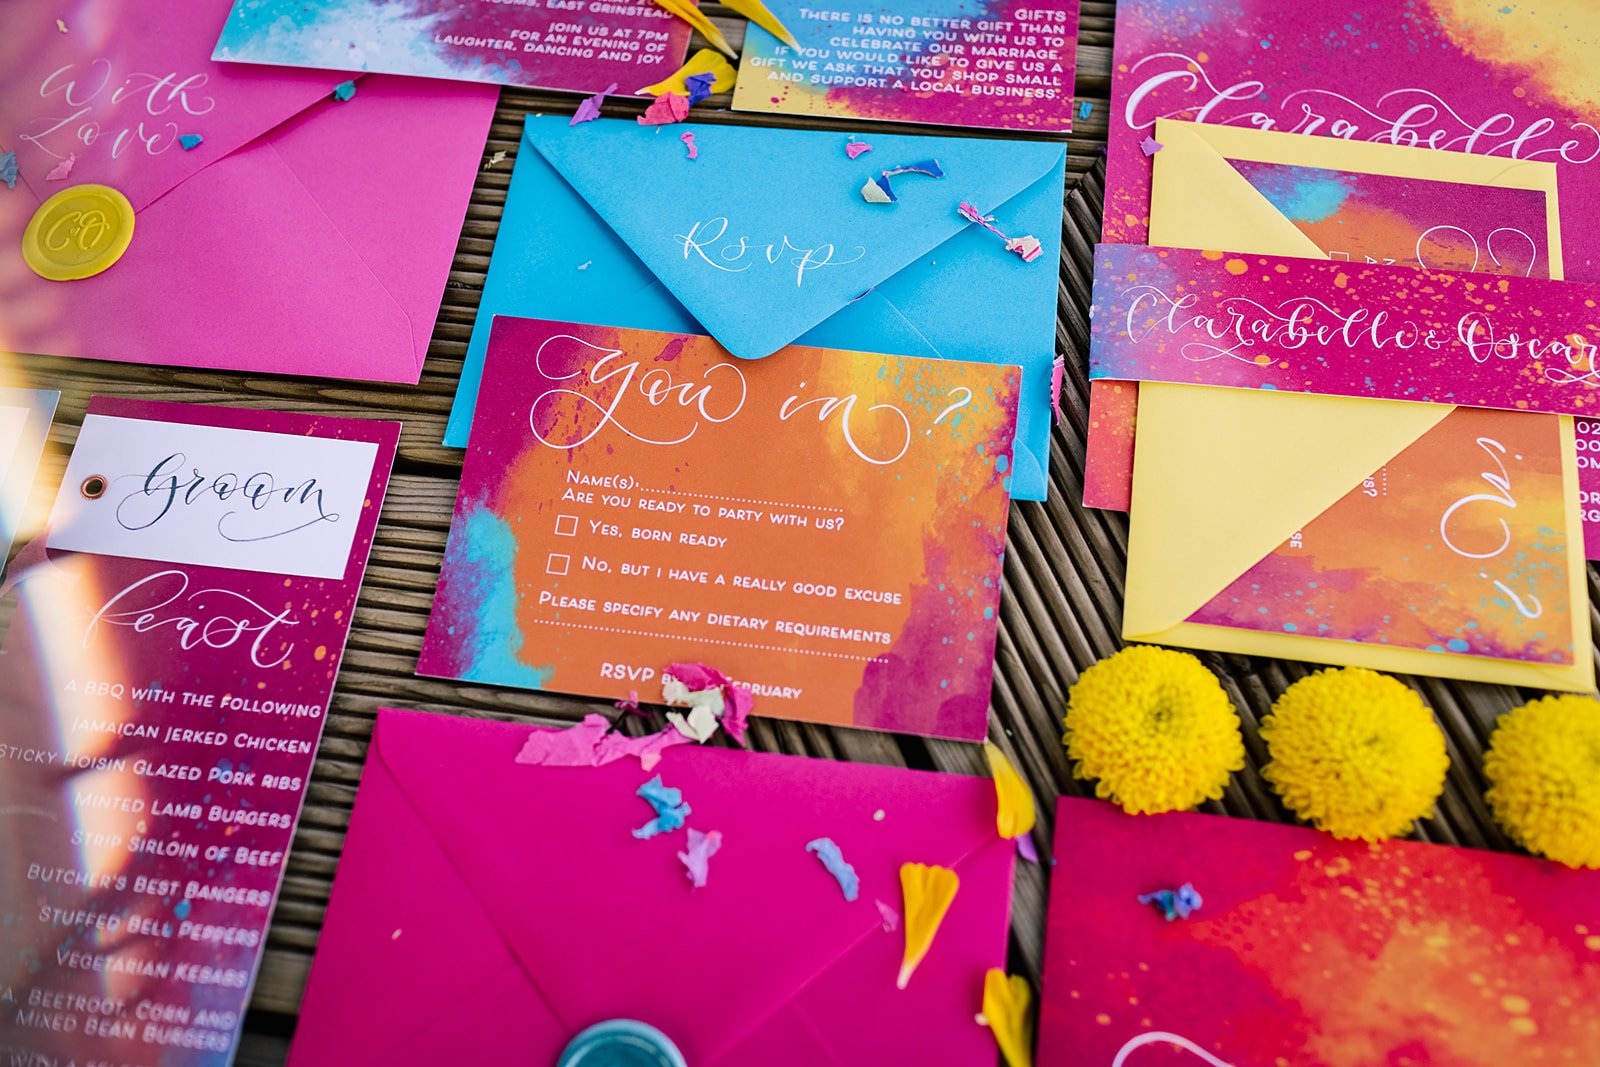 Festival wedding stationery watercolour wedding stationery with hot pink orange and blue,calligraphy, custom wax seals and calligraphy envelopes you in rsvp card.jpg